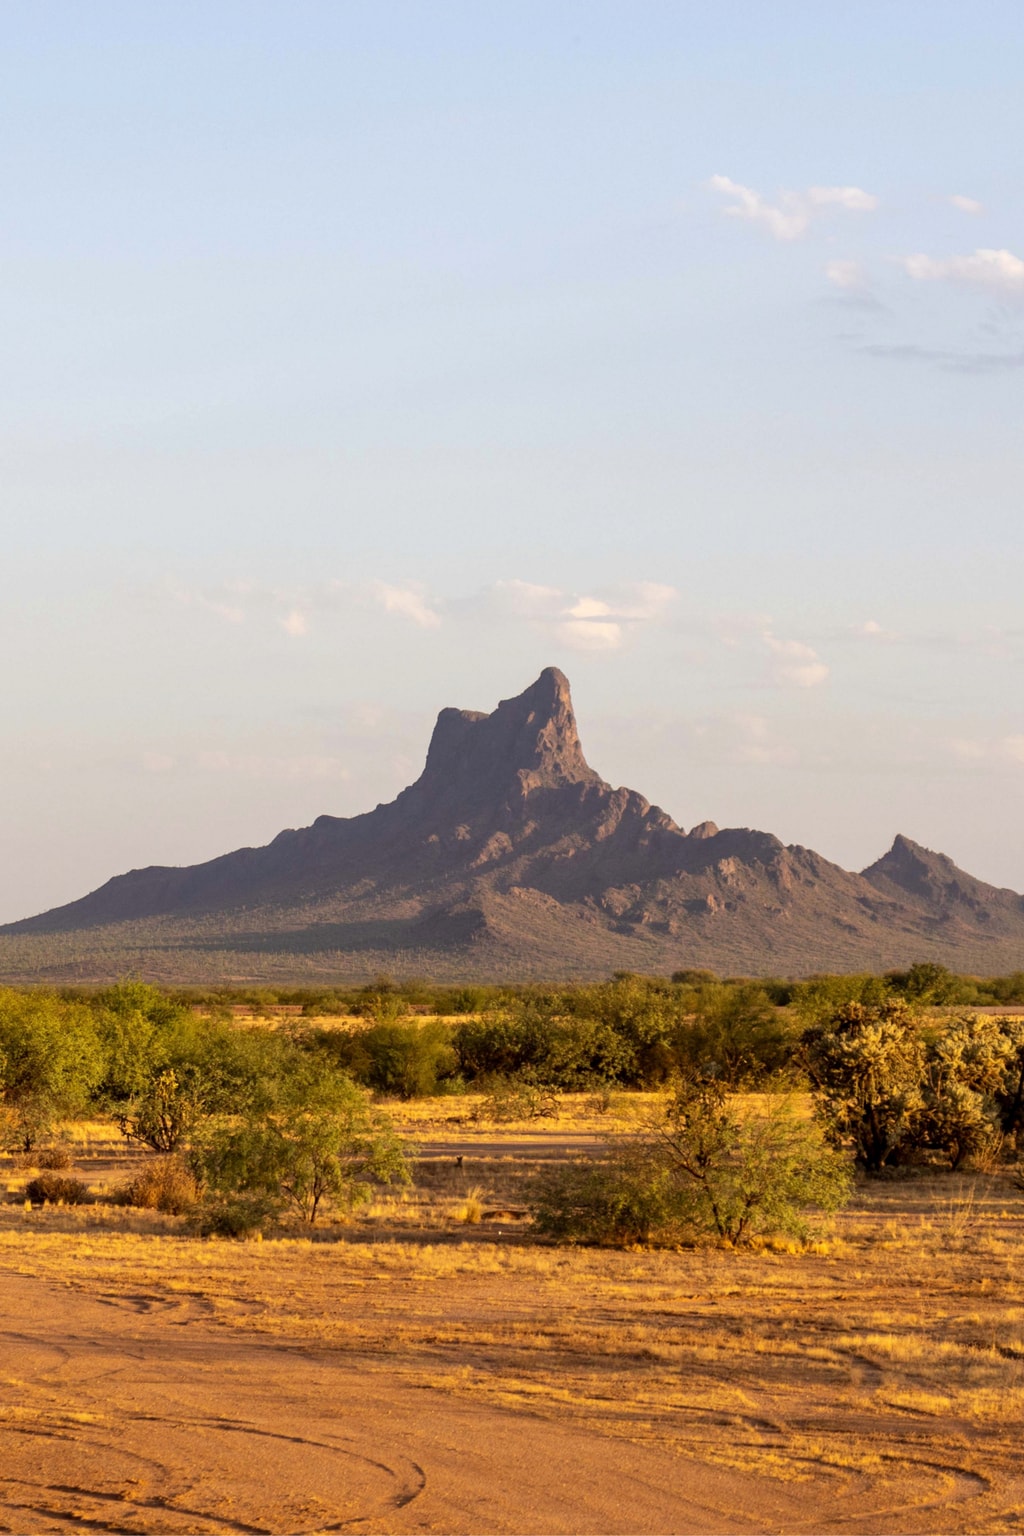 Picacho Peak State Park located between Phoenix and Tucson